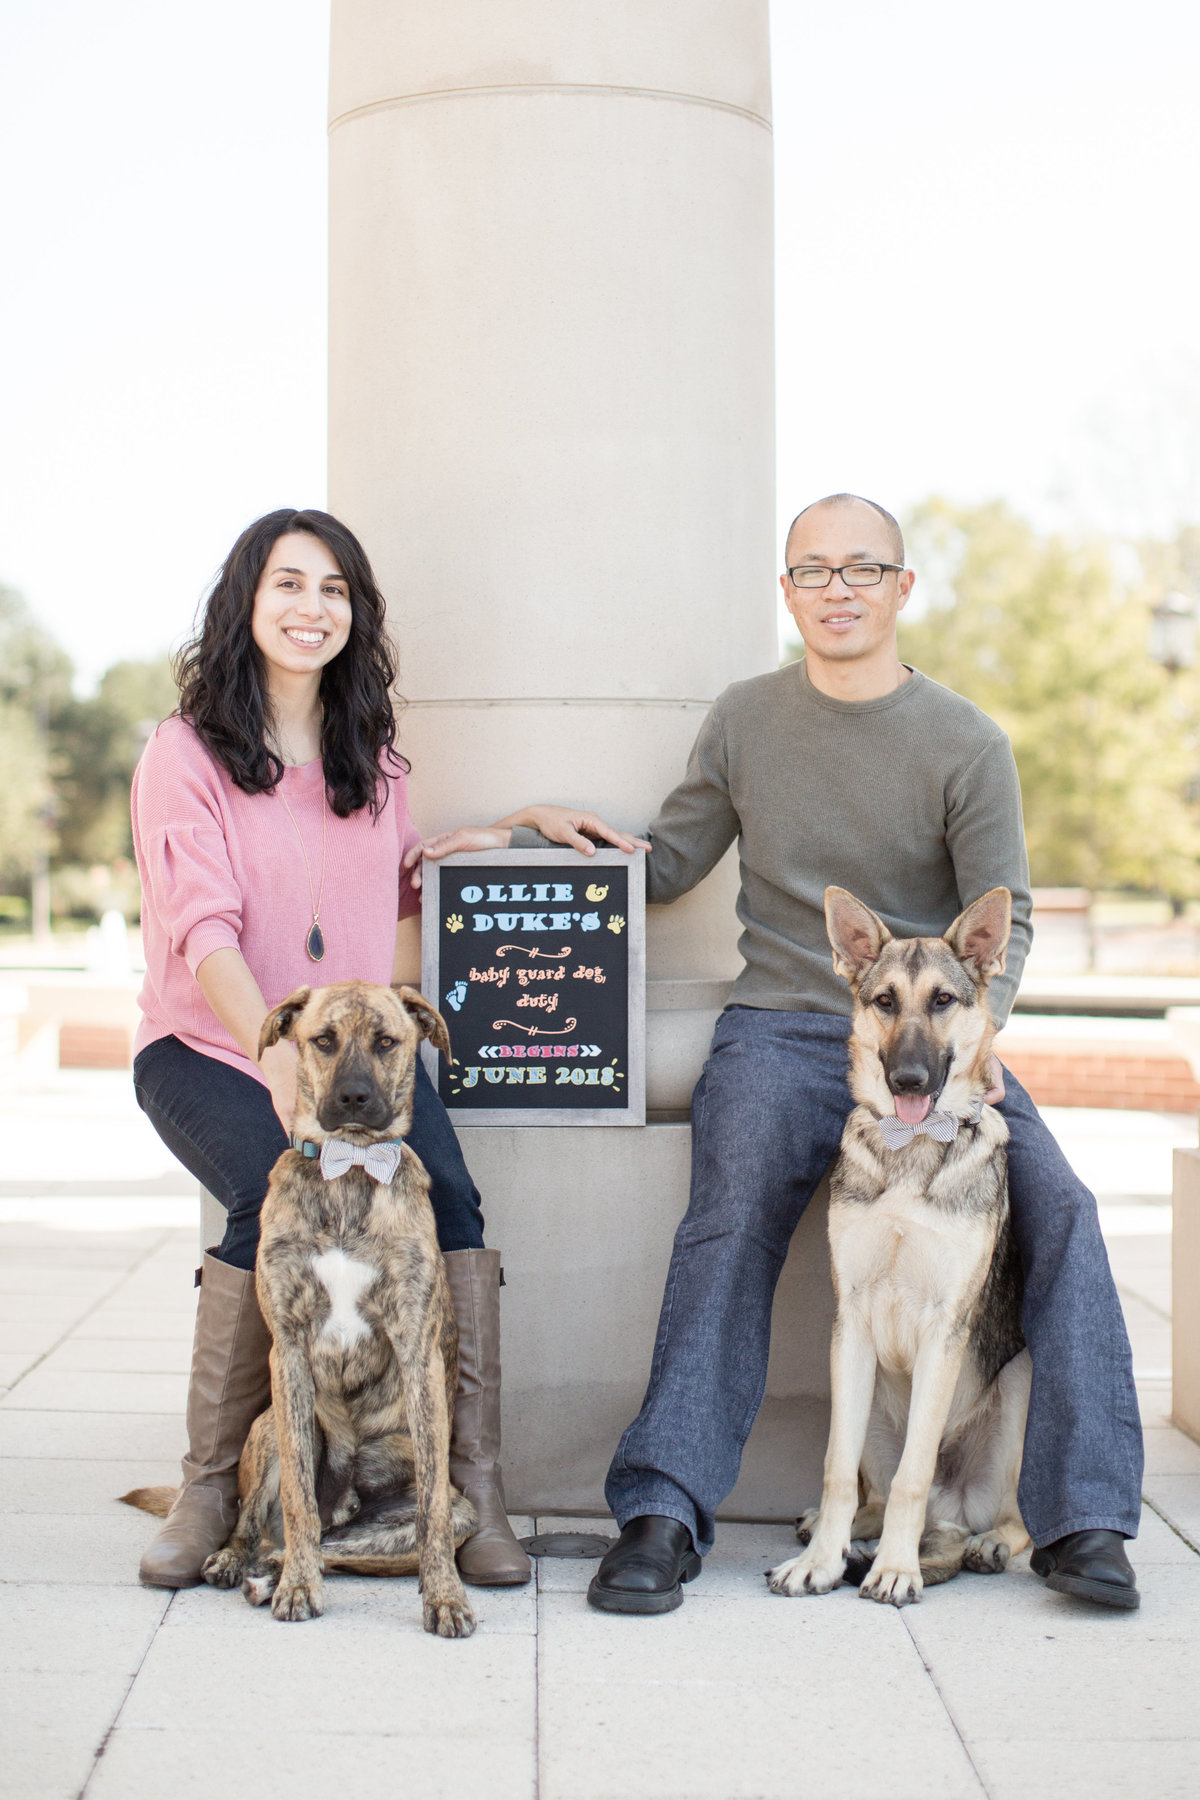 Sidri Rasool family portrait with their dogs at The University of South Alabama in Mobile, Alabama.